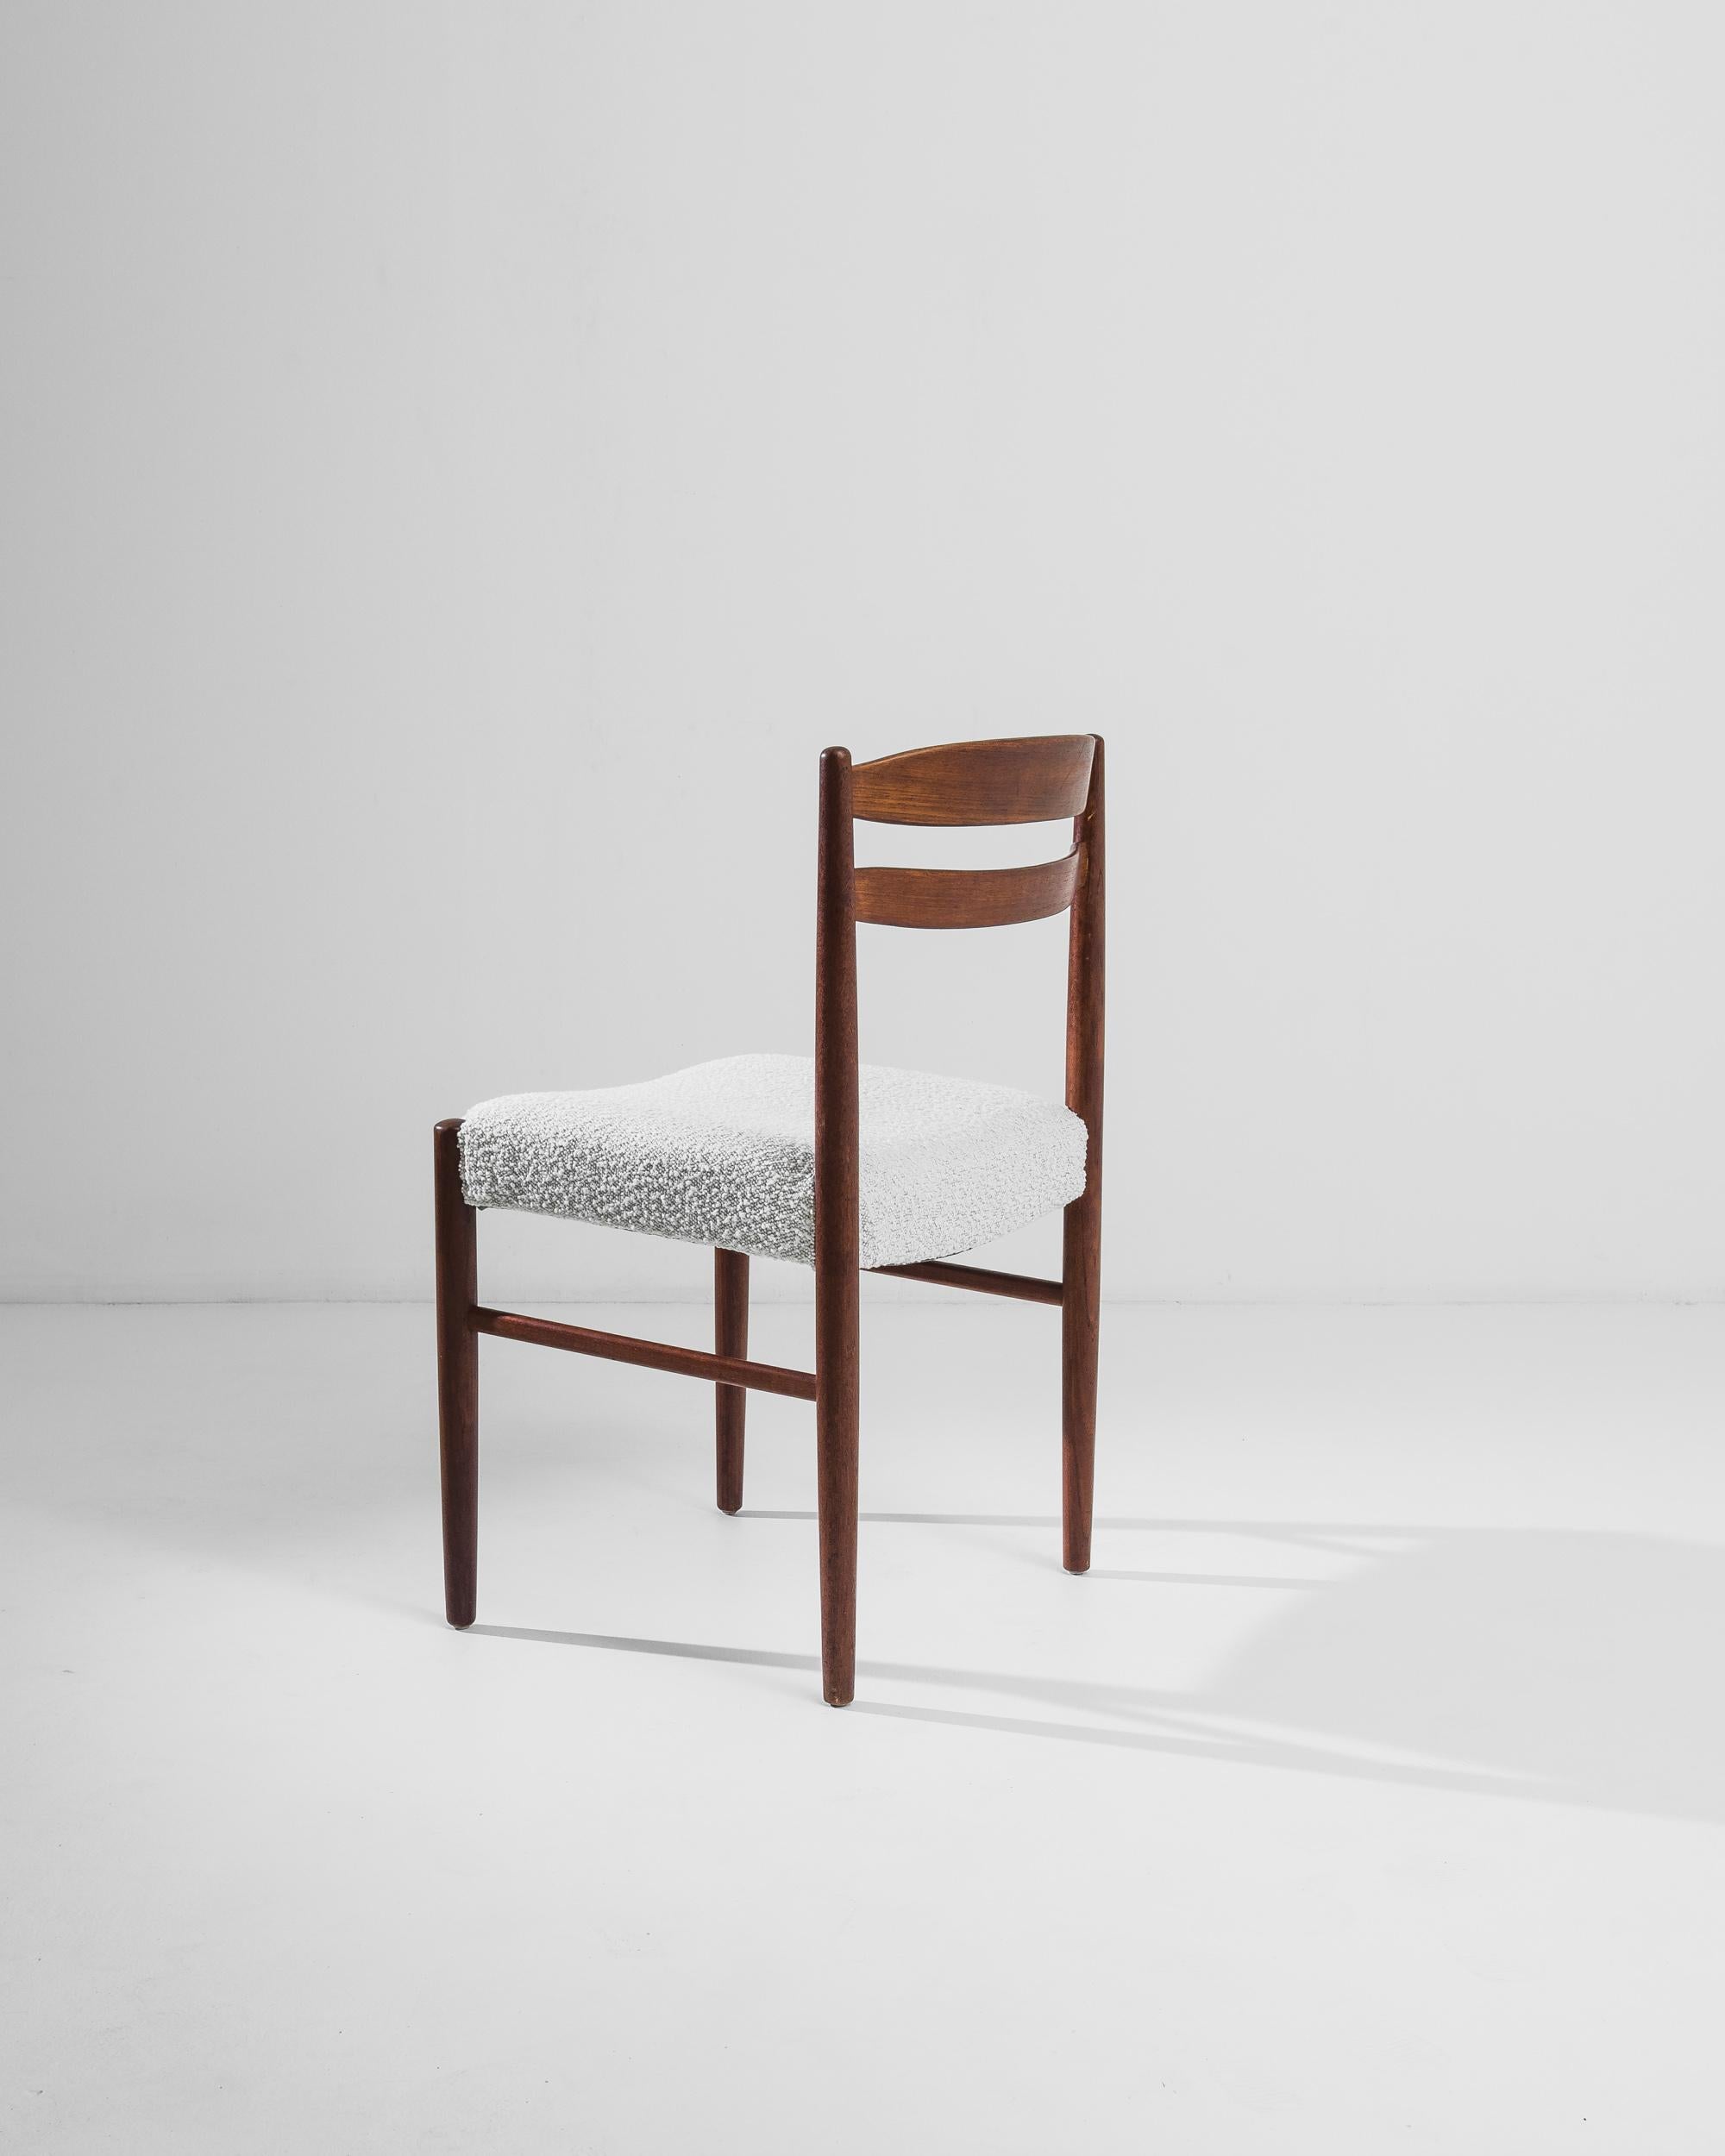 20th Century Danish Wooden Chair with Upholstered Seat 2